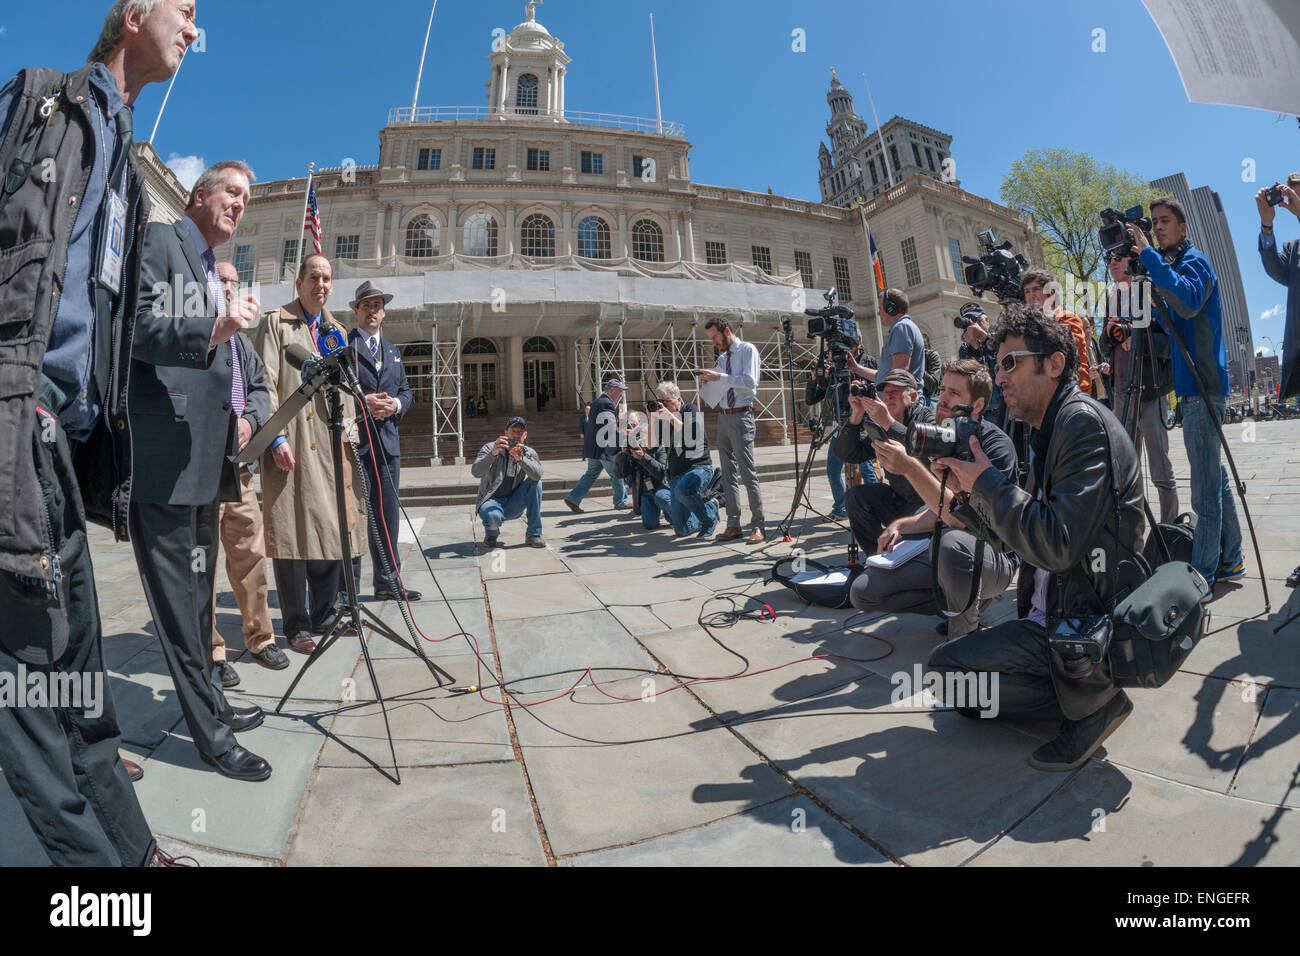 Council member Daniel Dromm, at podium, with other members of the New York City Council and officers of the NY Press Photographers Association at a news conference at City Hall on Tuesday, April 28, 2015 calling for the restoration of the parking placards which were arbitrarily suspended by the NYPD in 2009. Without the parking privileges it is difficult for members of the press to cover breaking news without incurring summons'.(© Richard B. Levine) Stock Photo